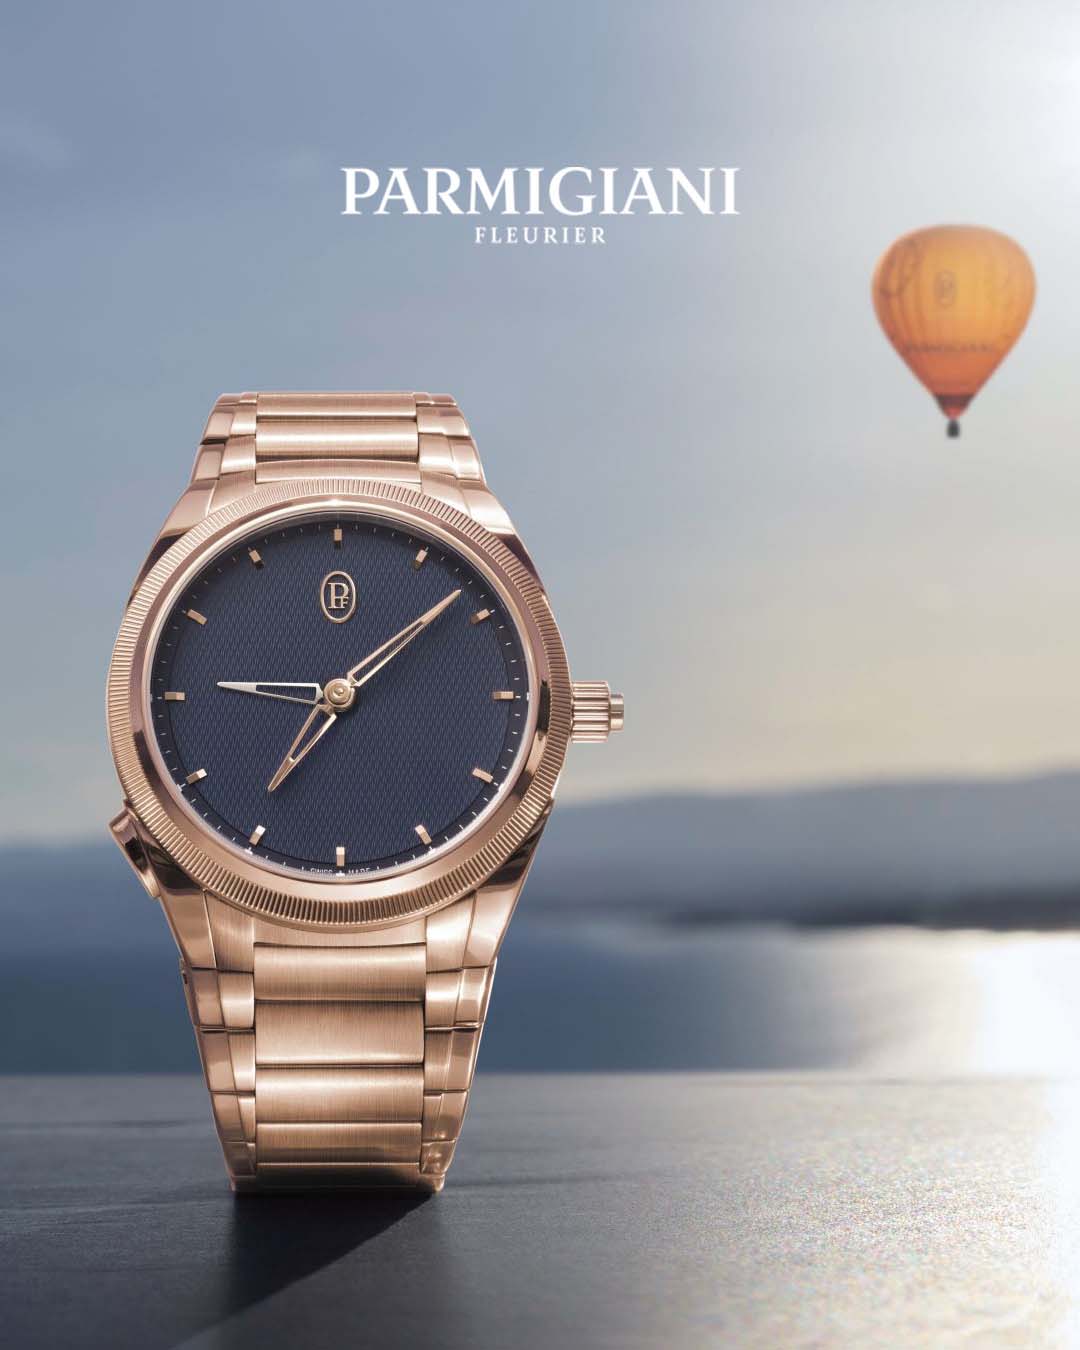 parmigiani-home-page-banner-mobile-sized